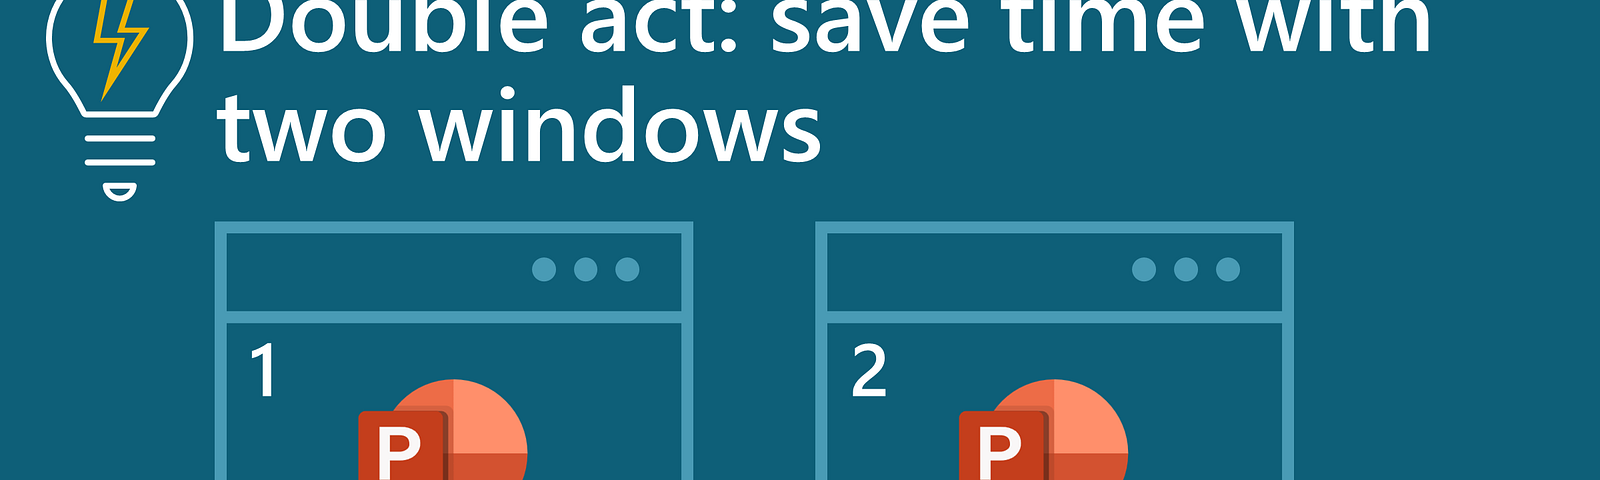 Article title plus a graphical depiction of two windows each with a PowerPoint icon, numbered 1 and 2